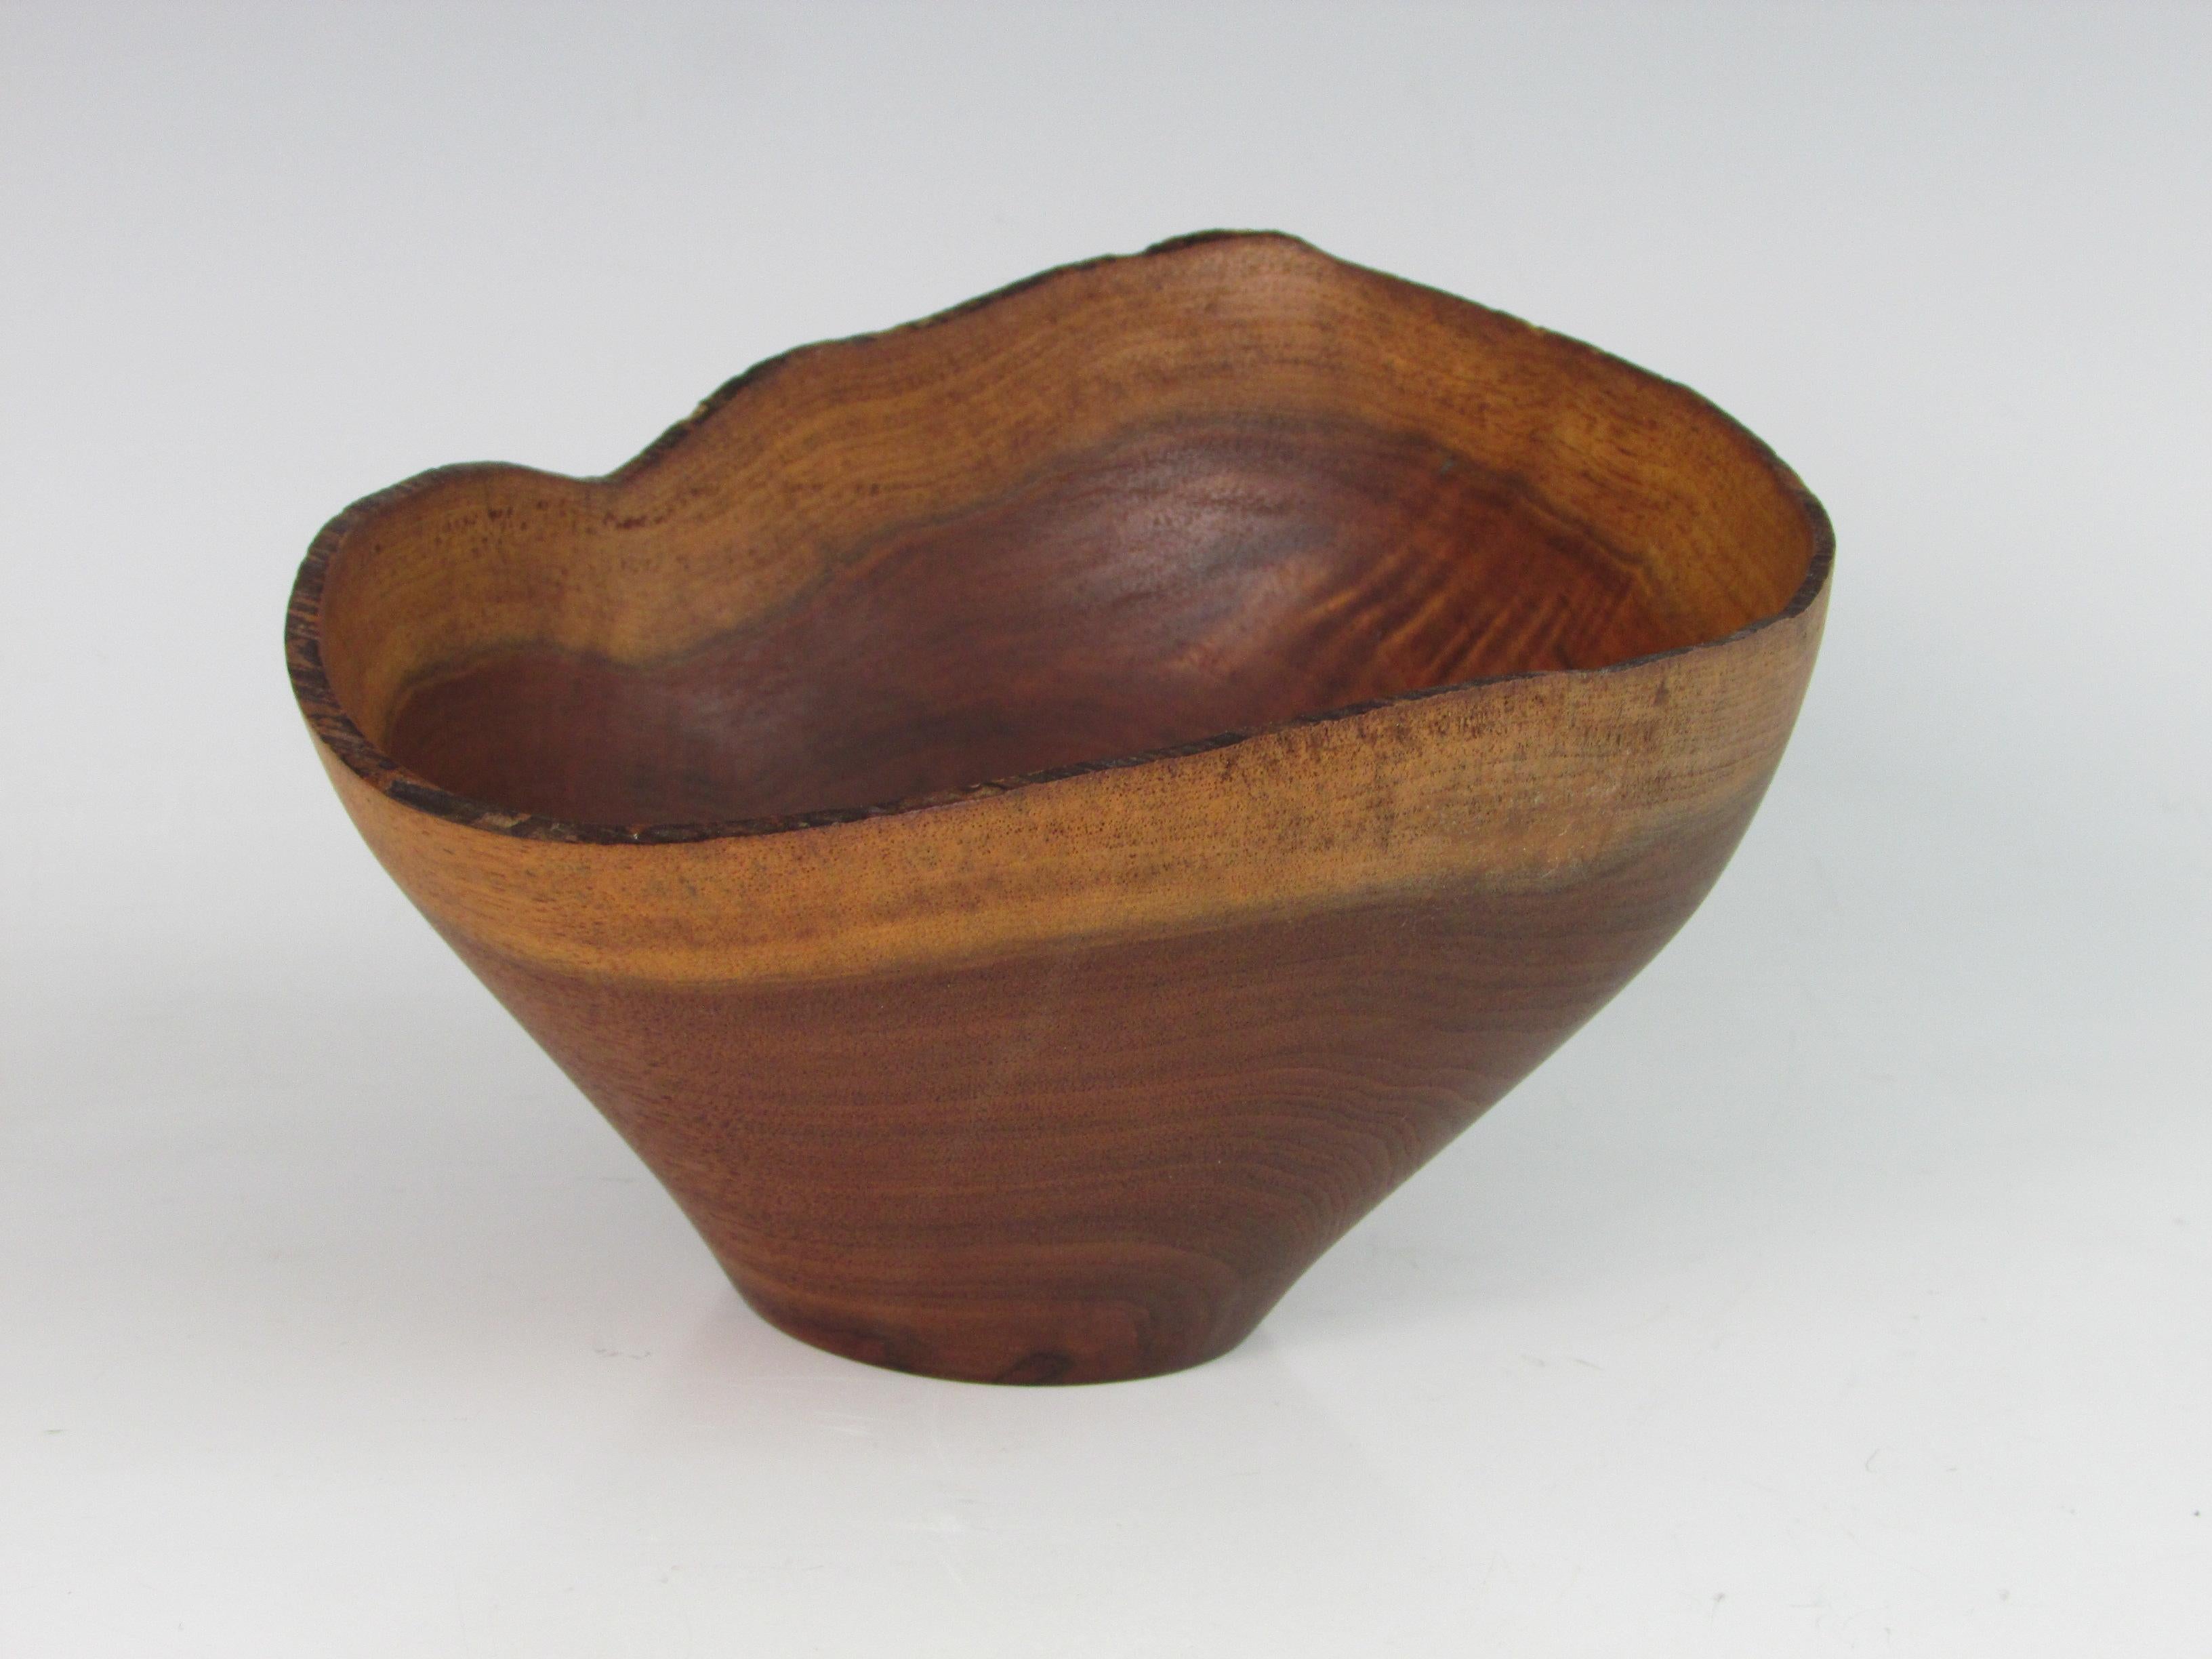 Nicely turned walnut bowl in wonderful form retaining live edge. Signed but signature is illegible.